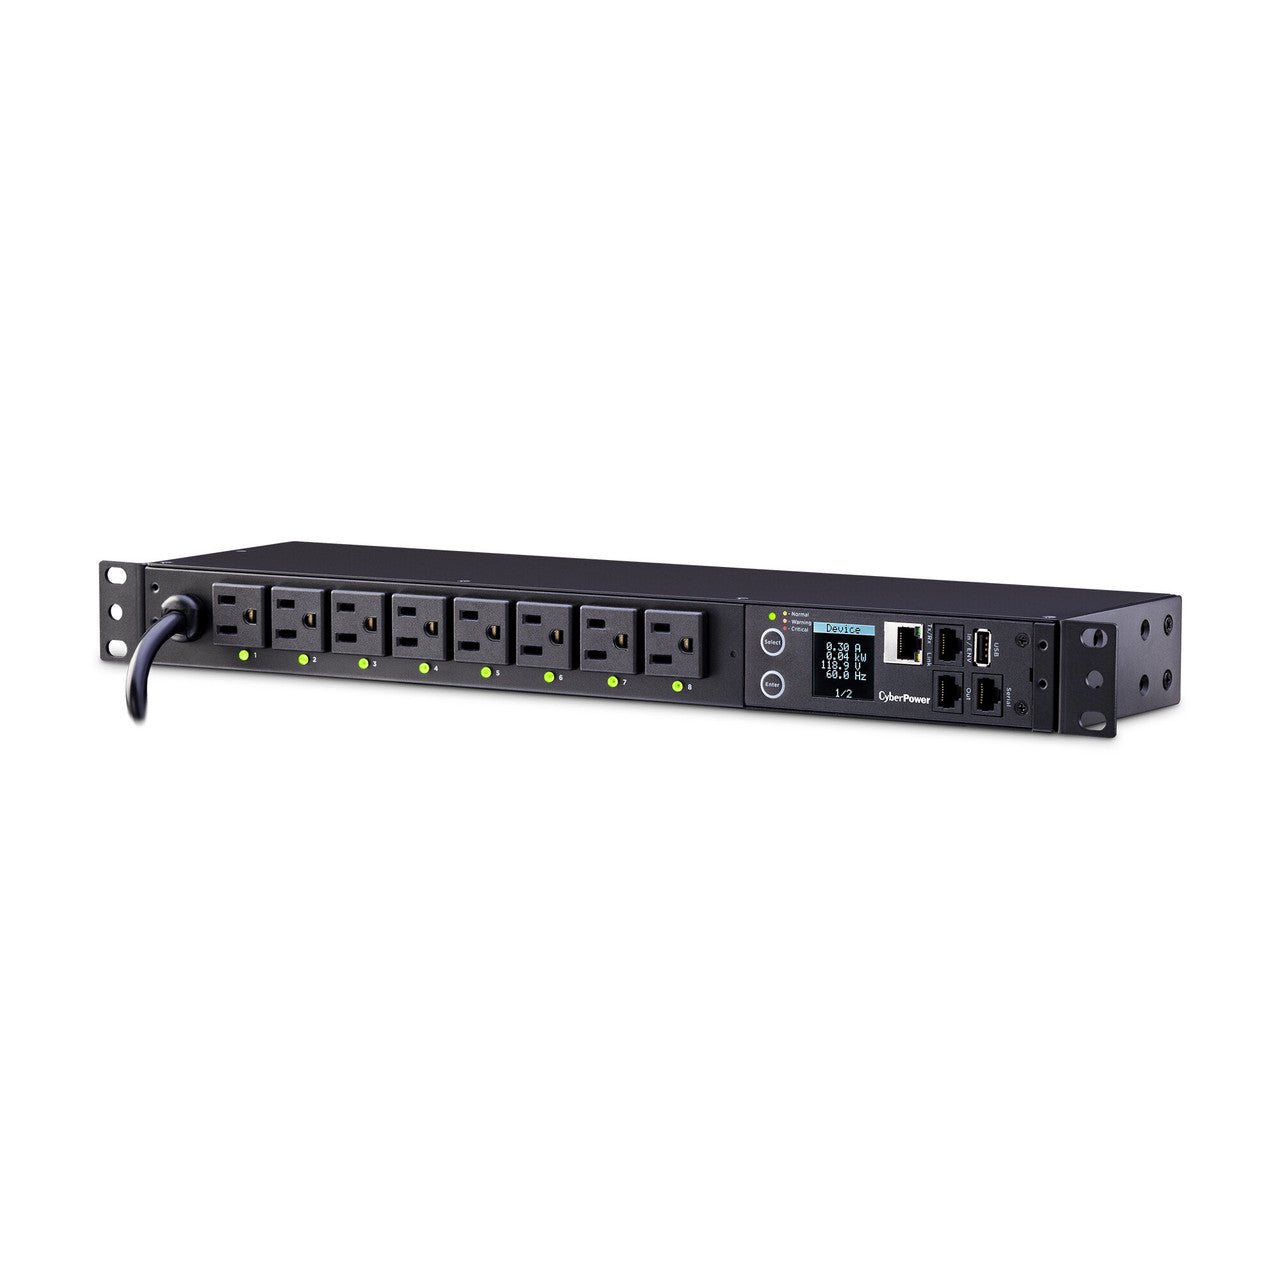 CyberPower PDU81001 SW MBO PDU 15A 120V Metered-by-Outlet Switched PDU NEMA Outlets 12ft cord 3yr Warranty